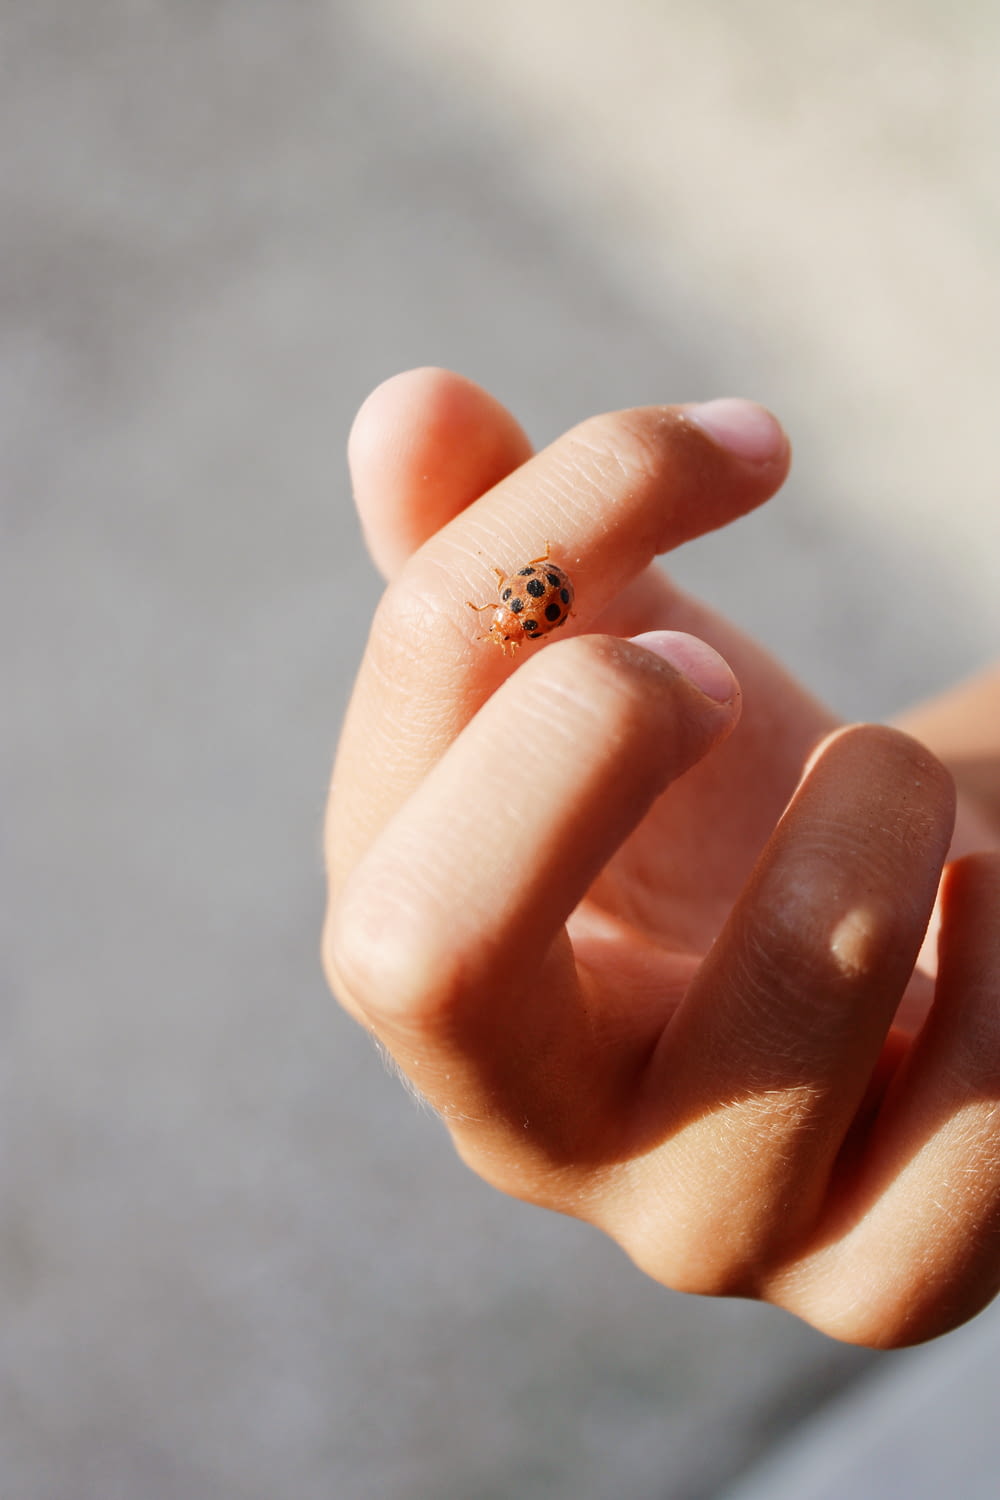 brown and black ladybug on persons finger